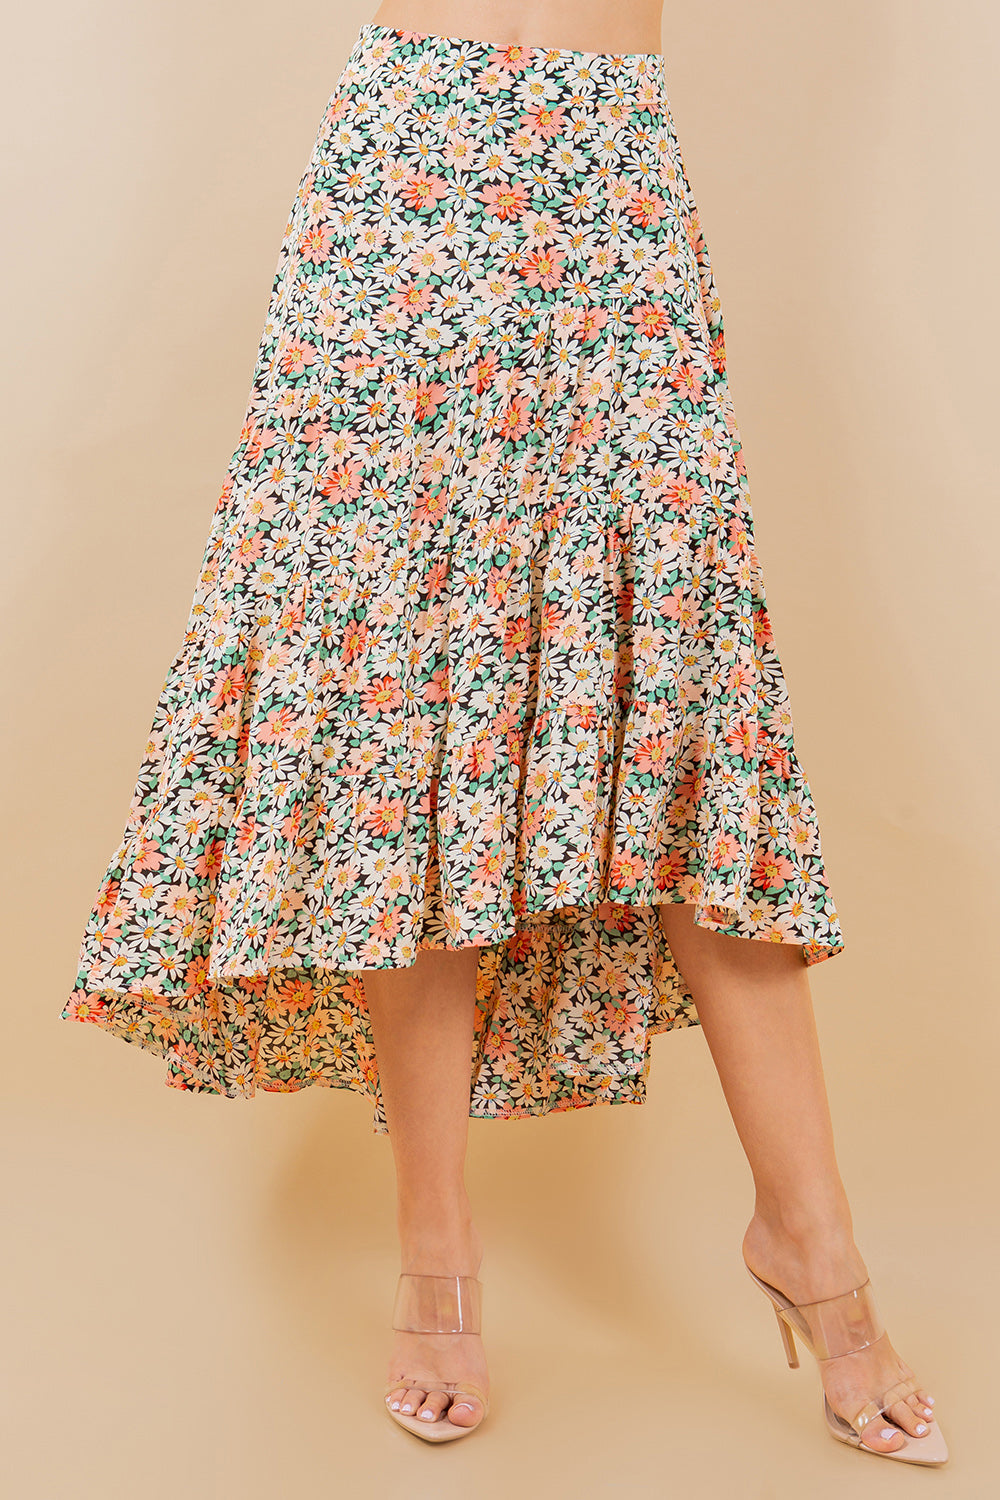 Retro Floral Tiered Skirt